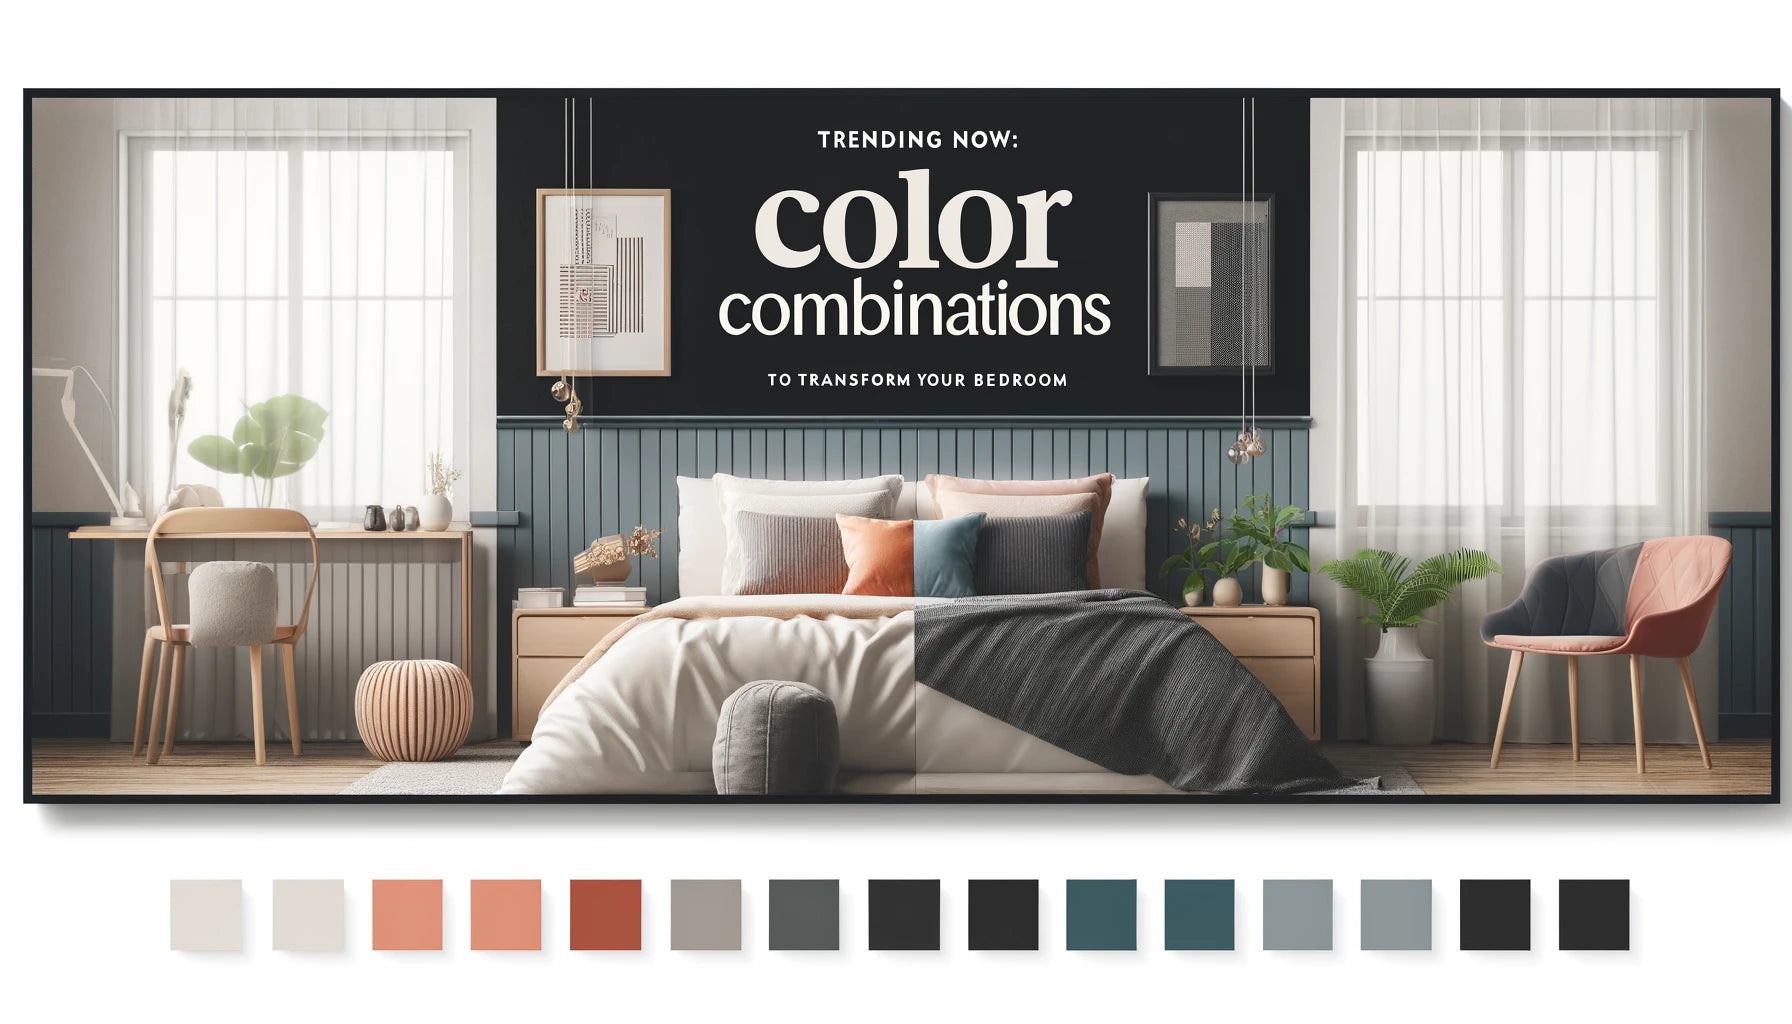 Trending Now: 8 Stunning Color Combinations to Transform Your Bedroom